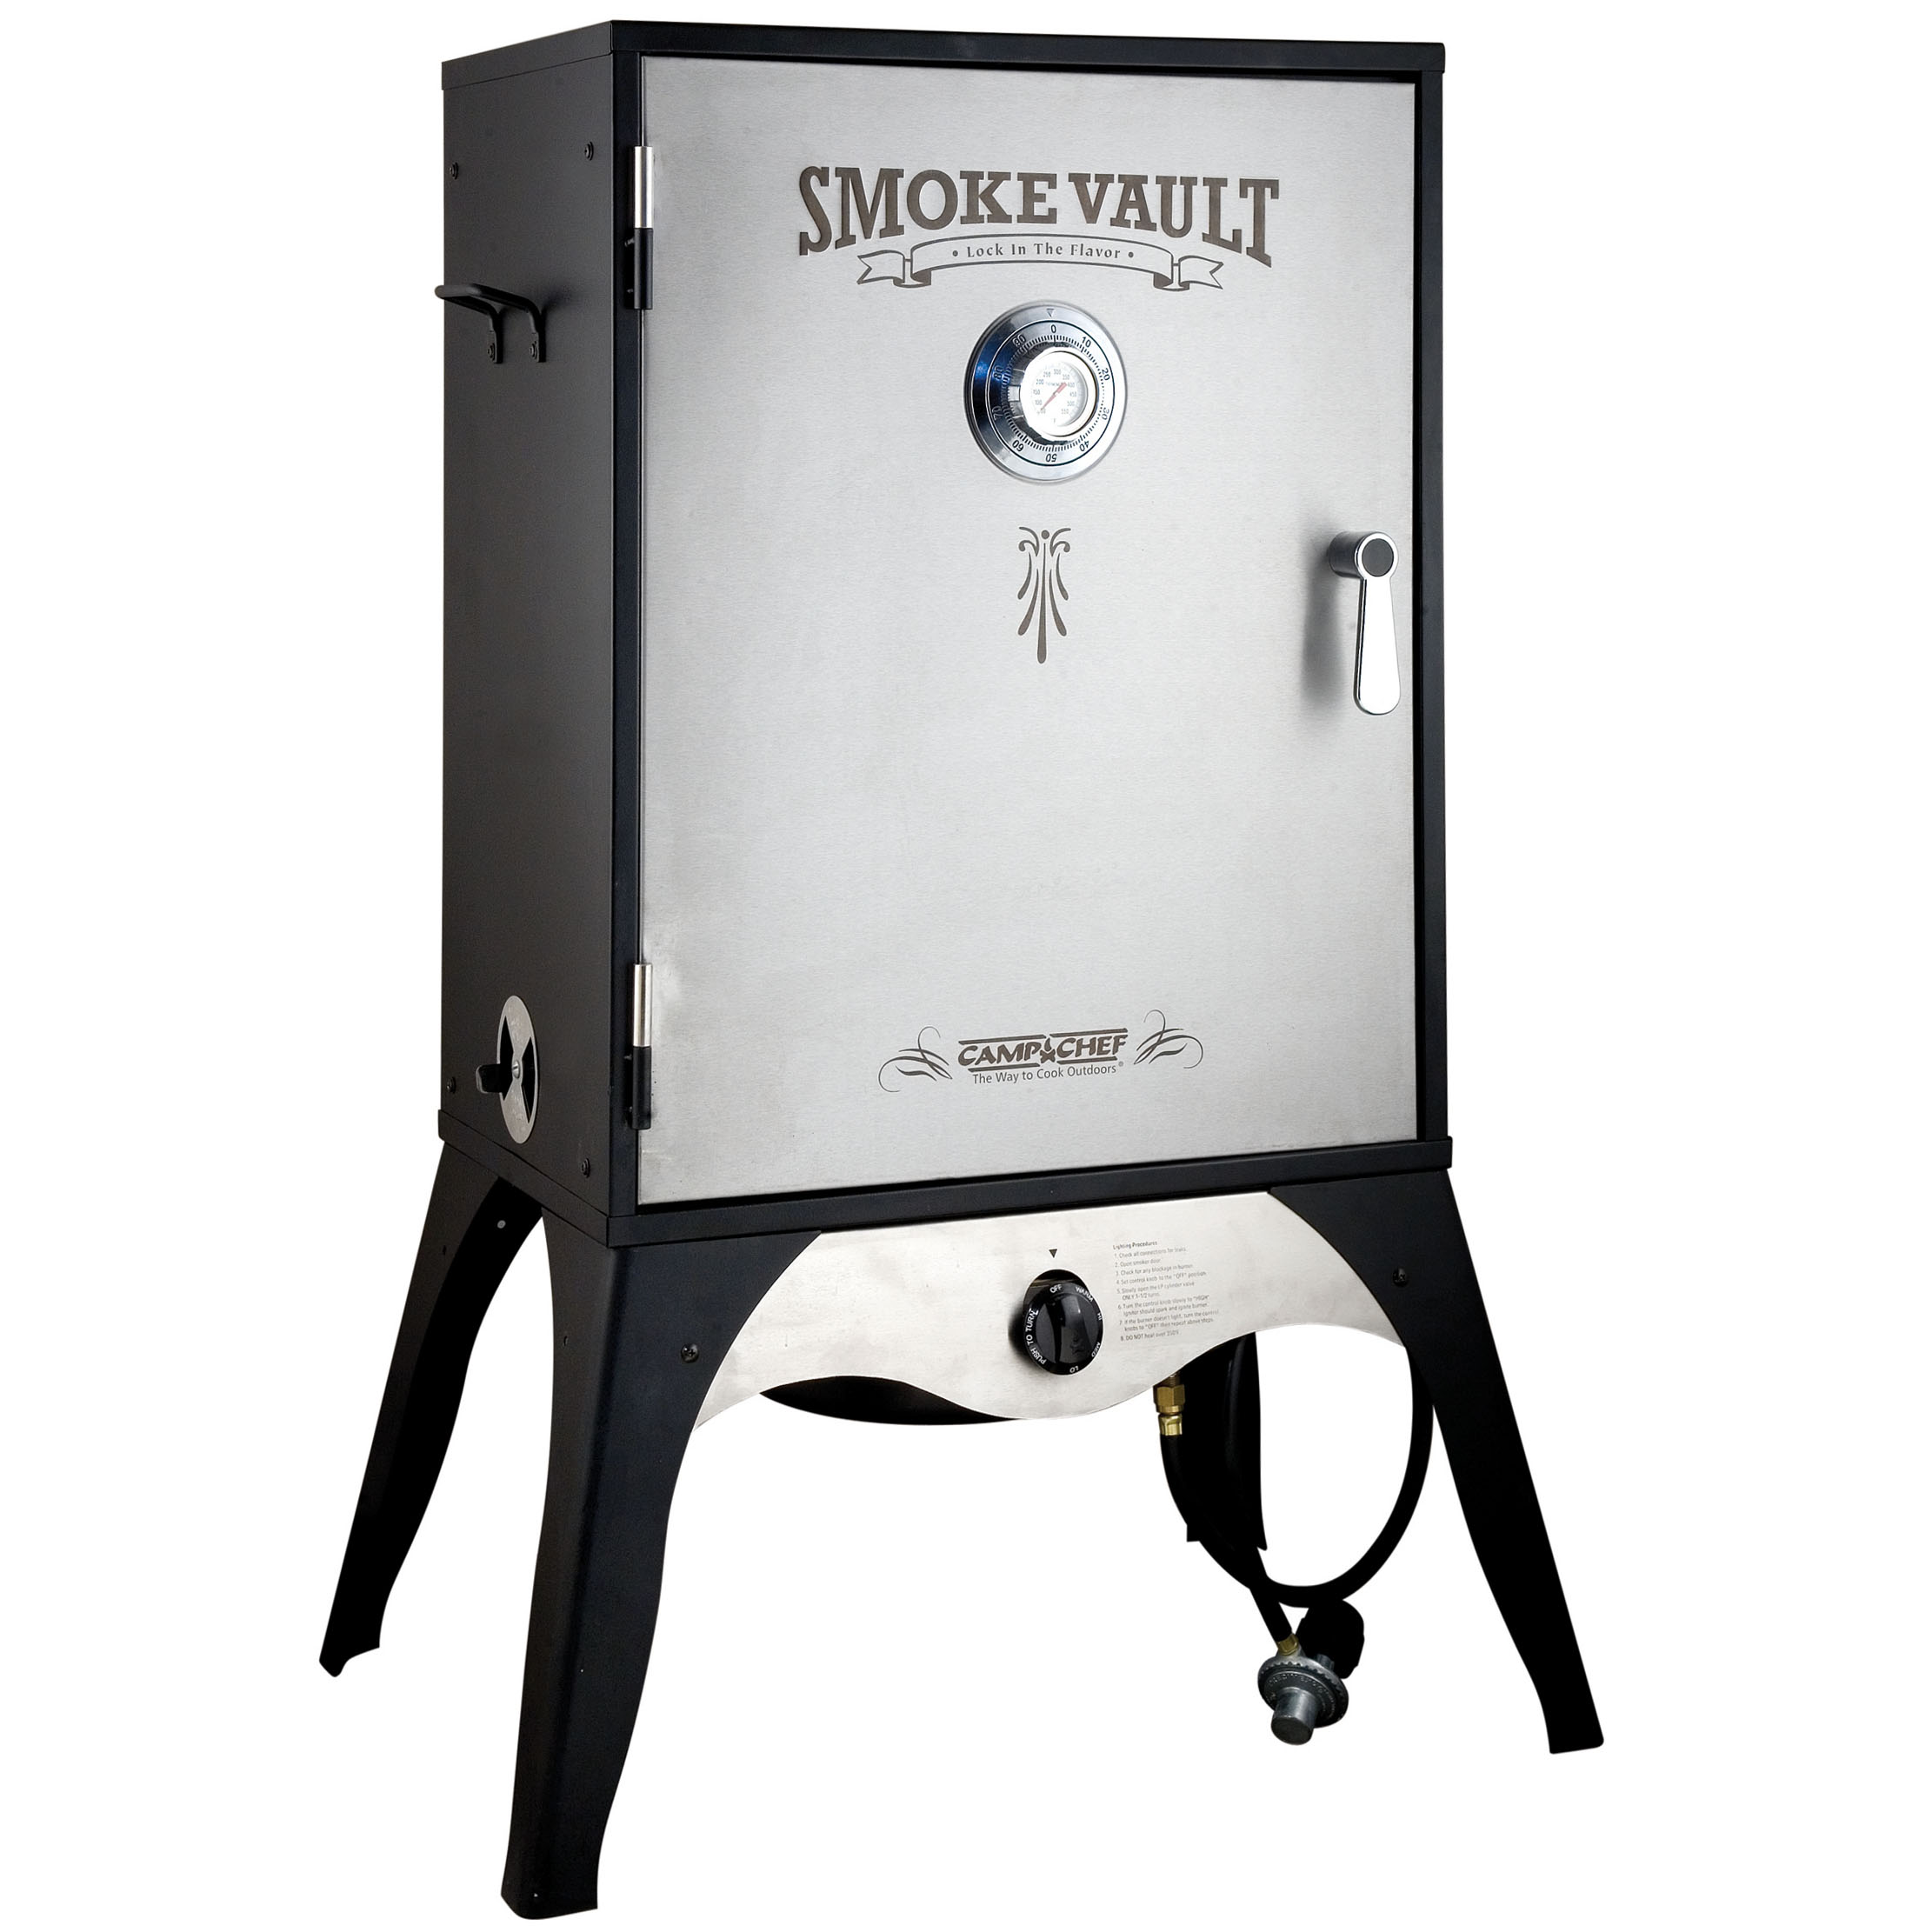 Camp Chef Smoke Vault 24 Inch, SMV24S, Smoker with Legs - image 1 of 11